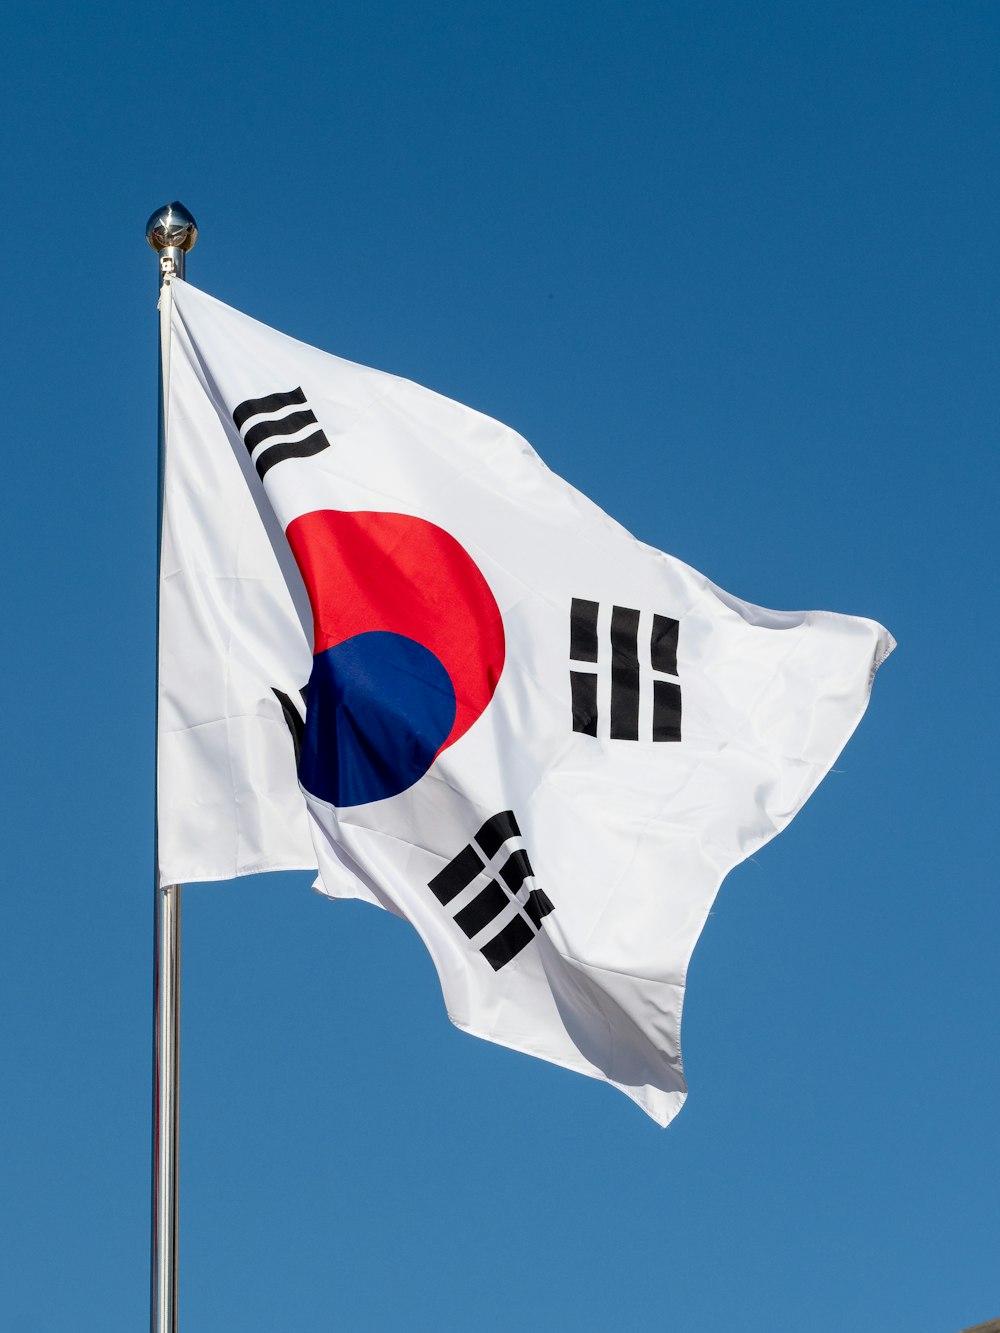 a korean flag flying in the wind with a blue sky in the background